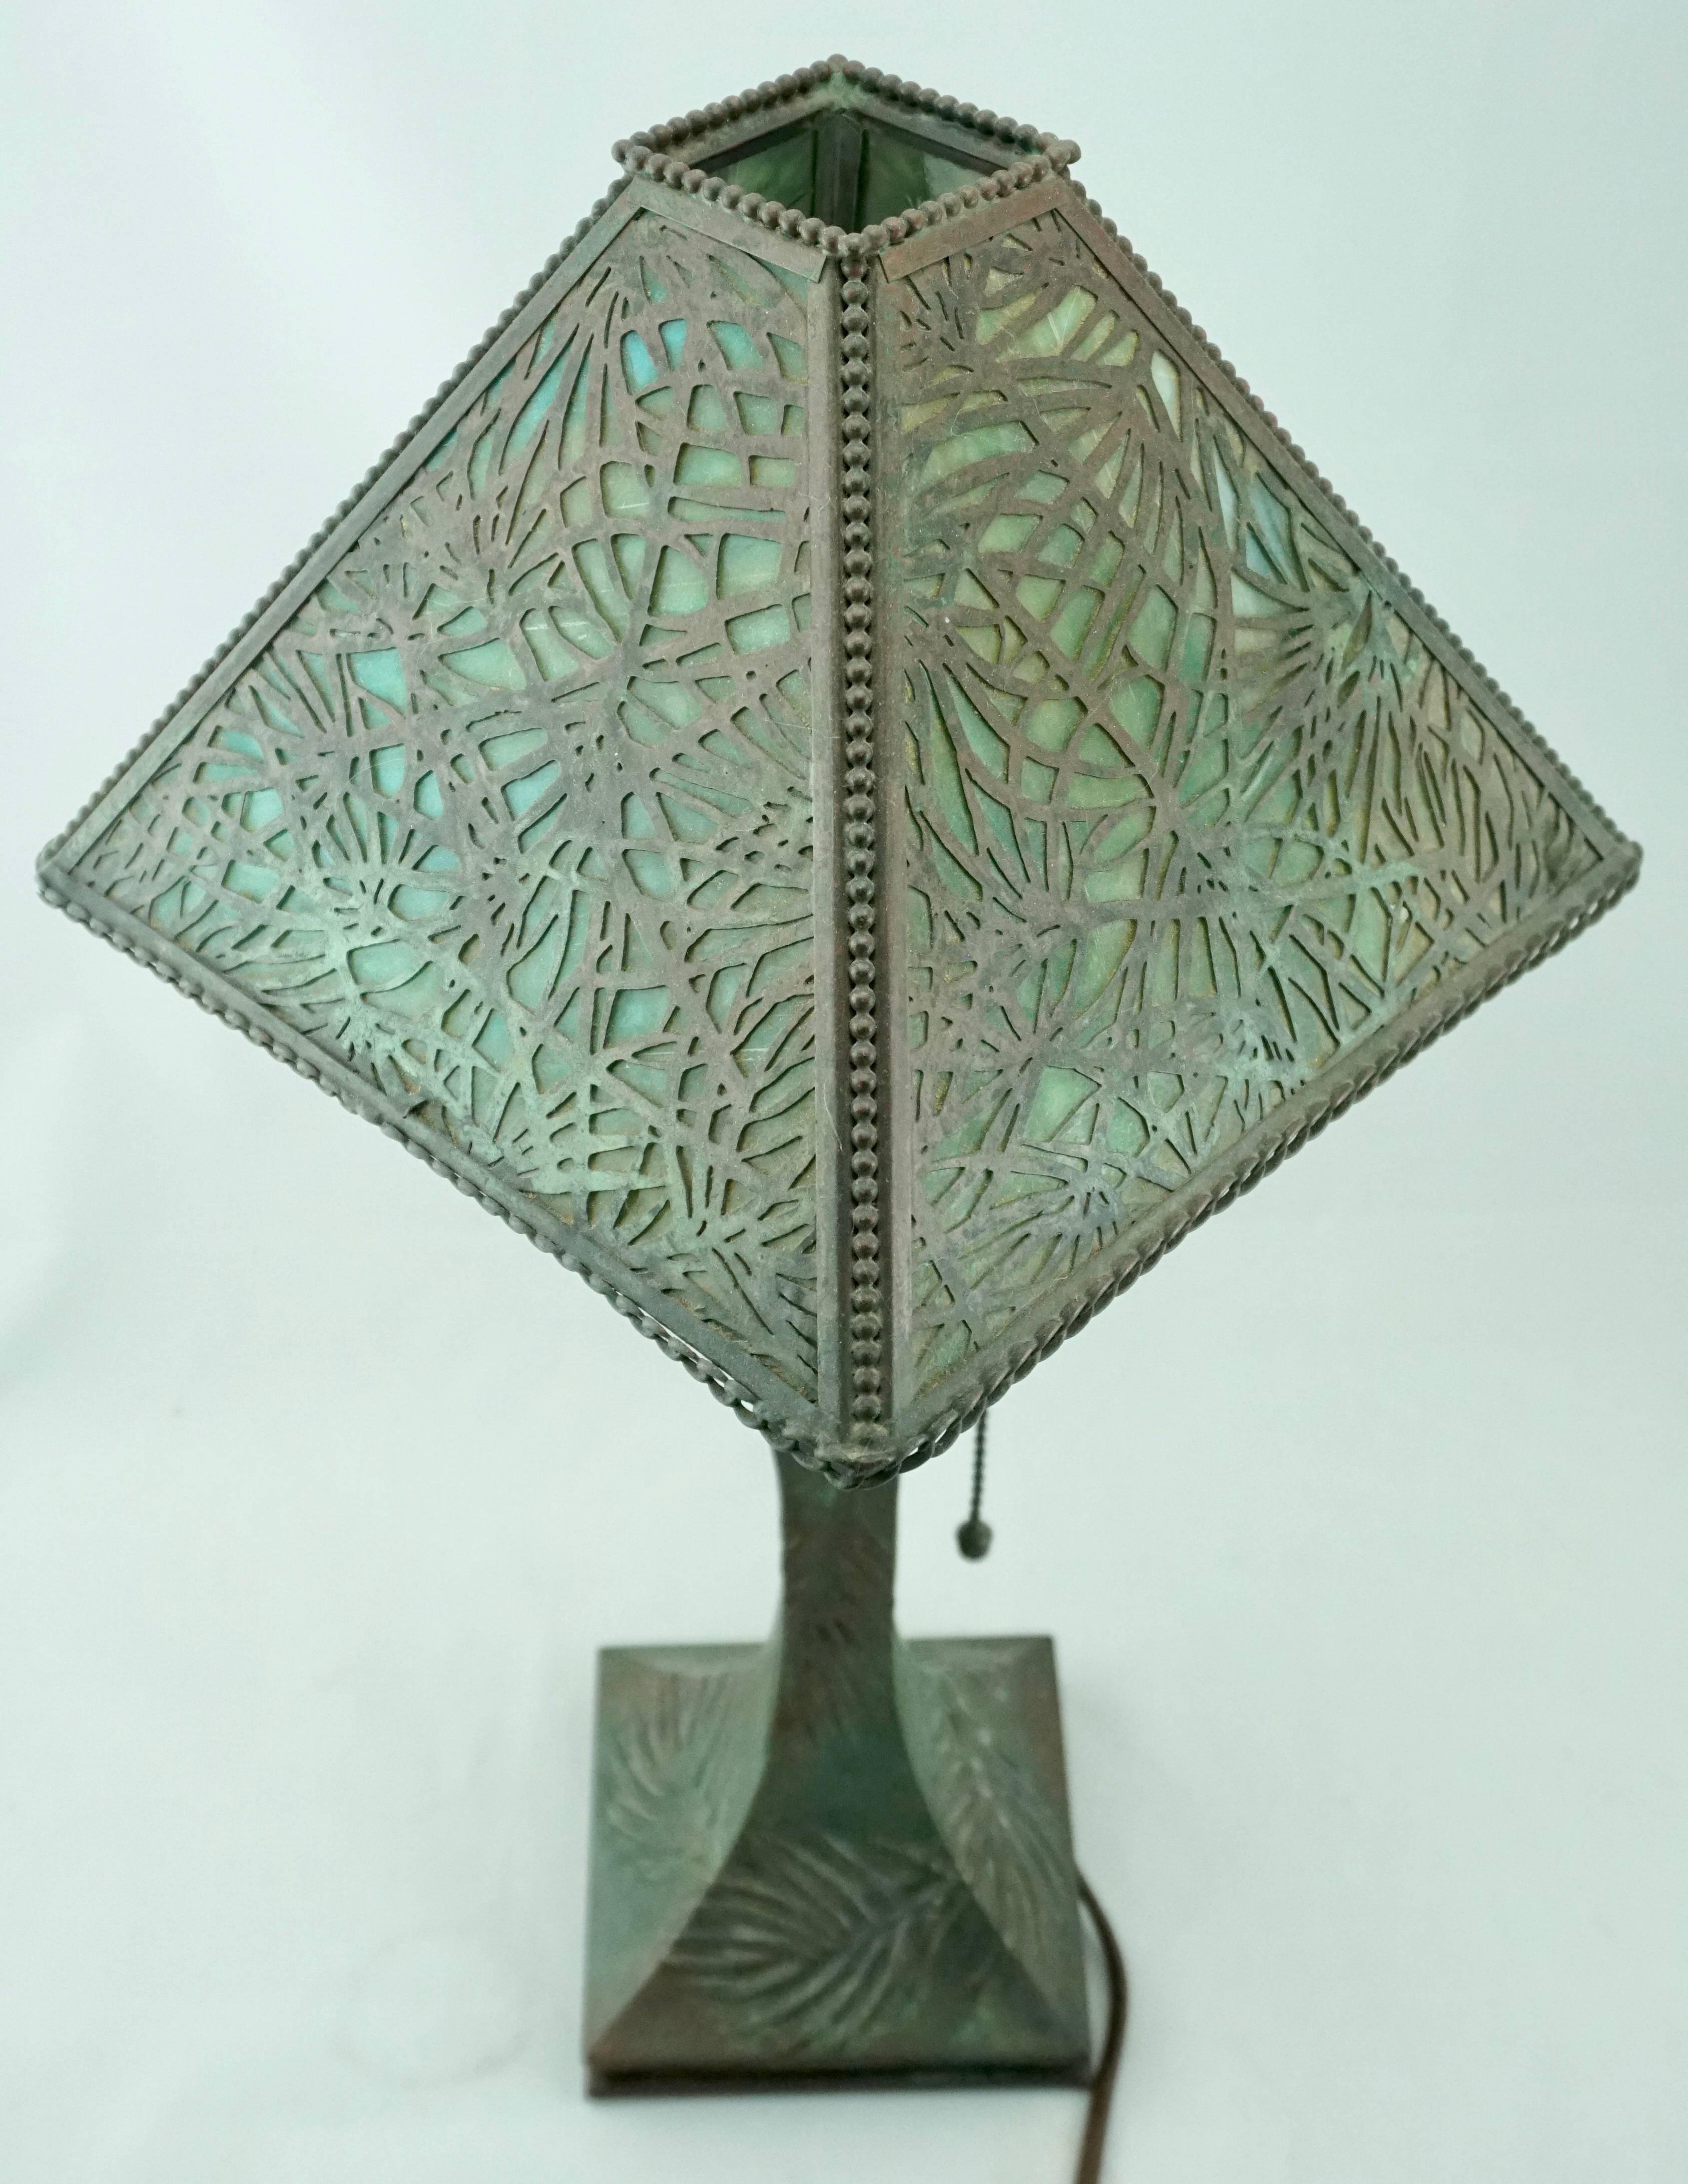 Early 20th Century Art Nouveau Pine Needle Bronze and Glass Riviere Studios Lamp, circa 1900